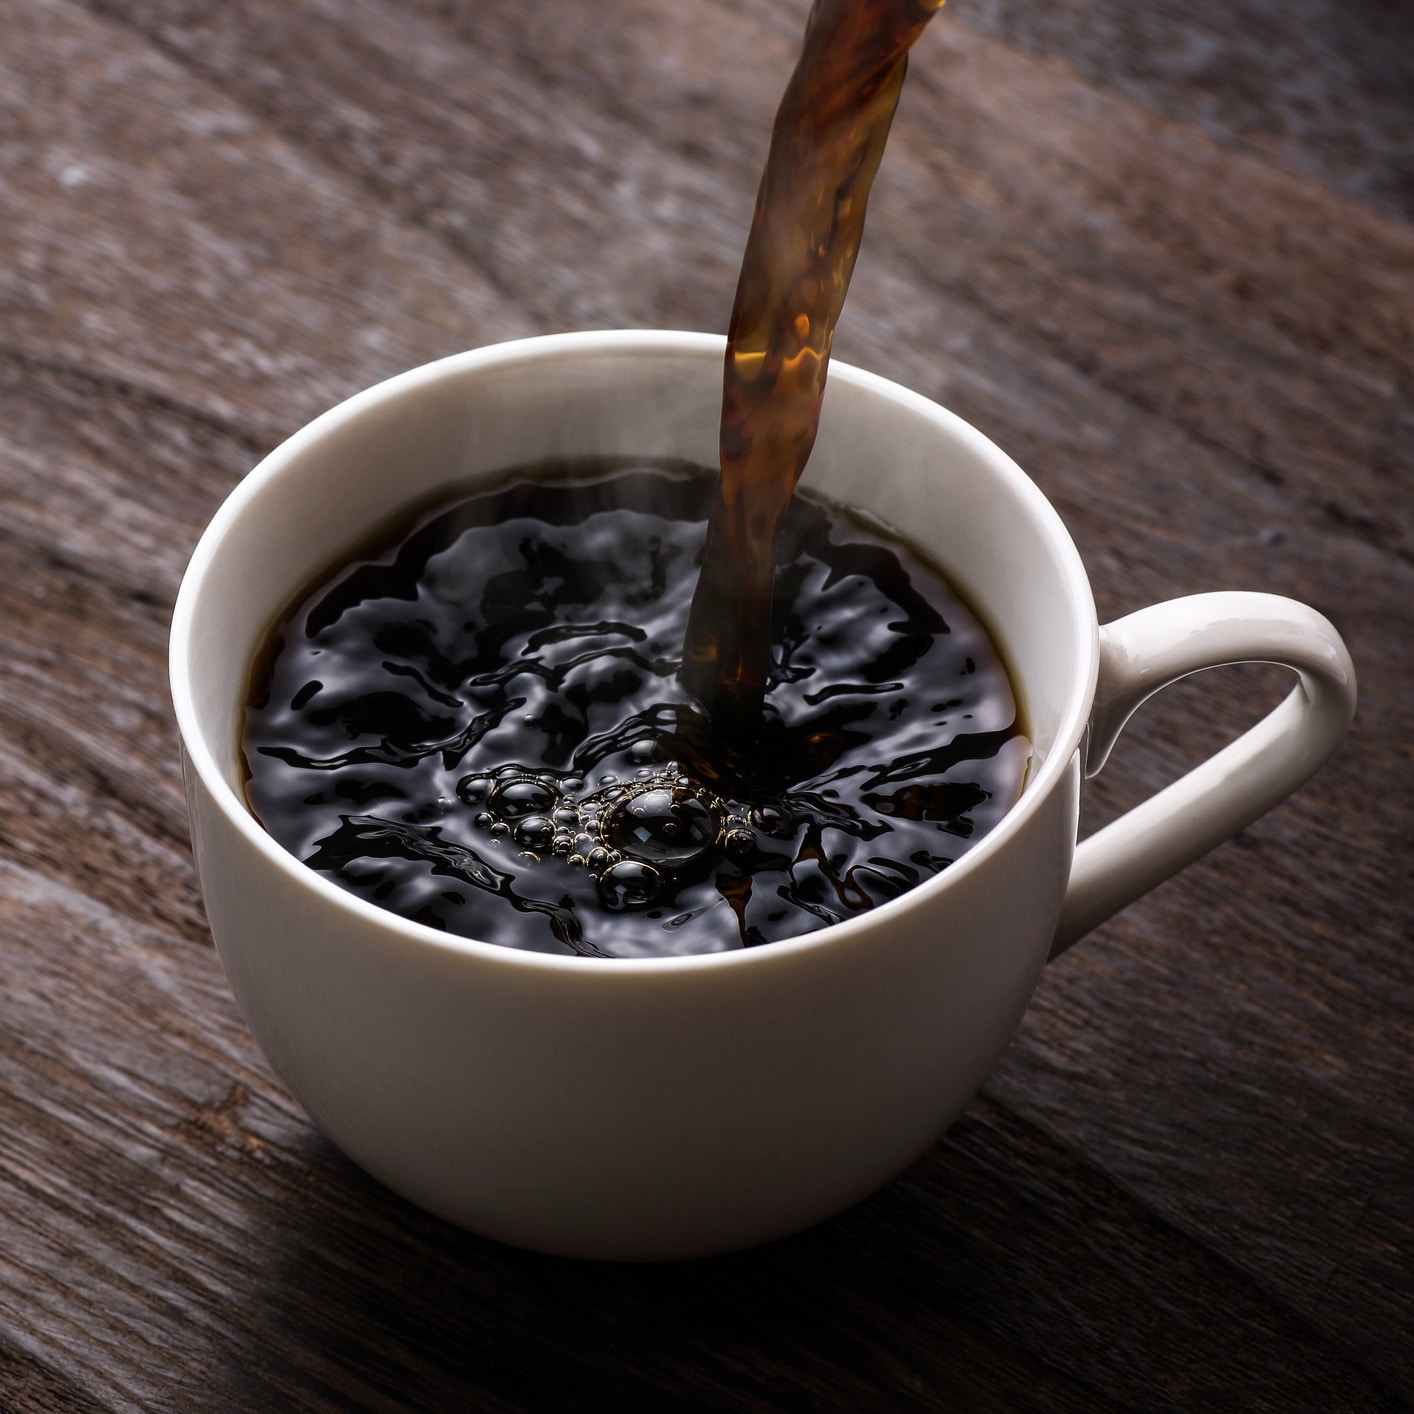 This is a photograph of Hot coffee